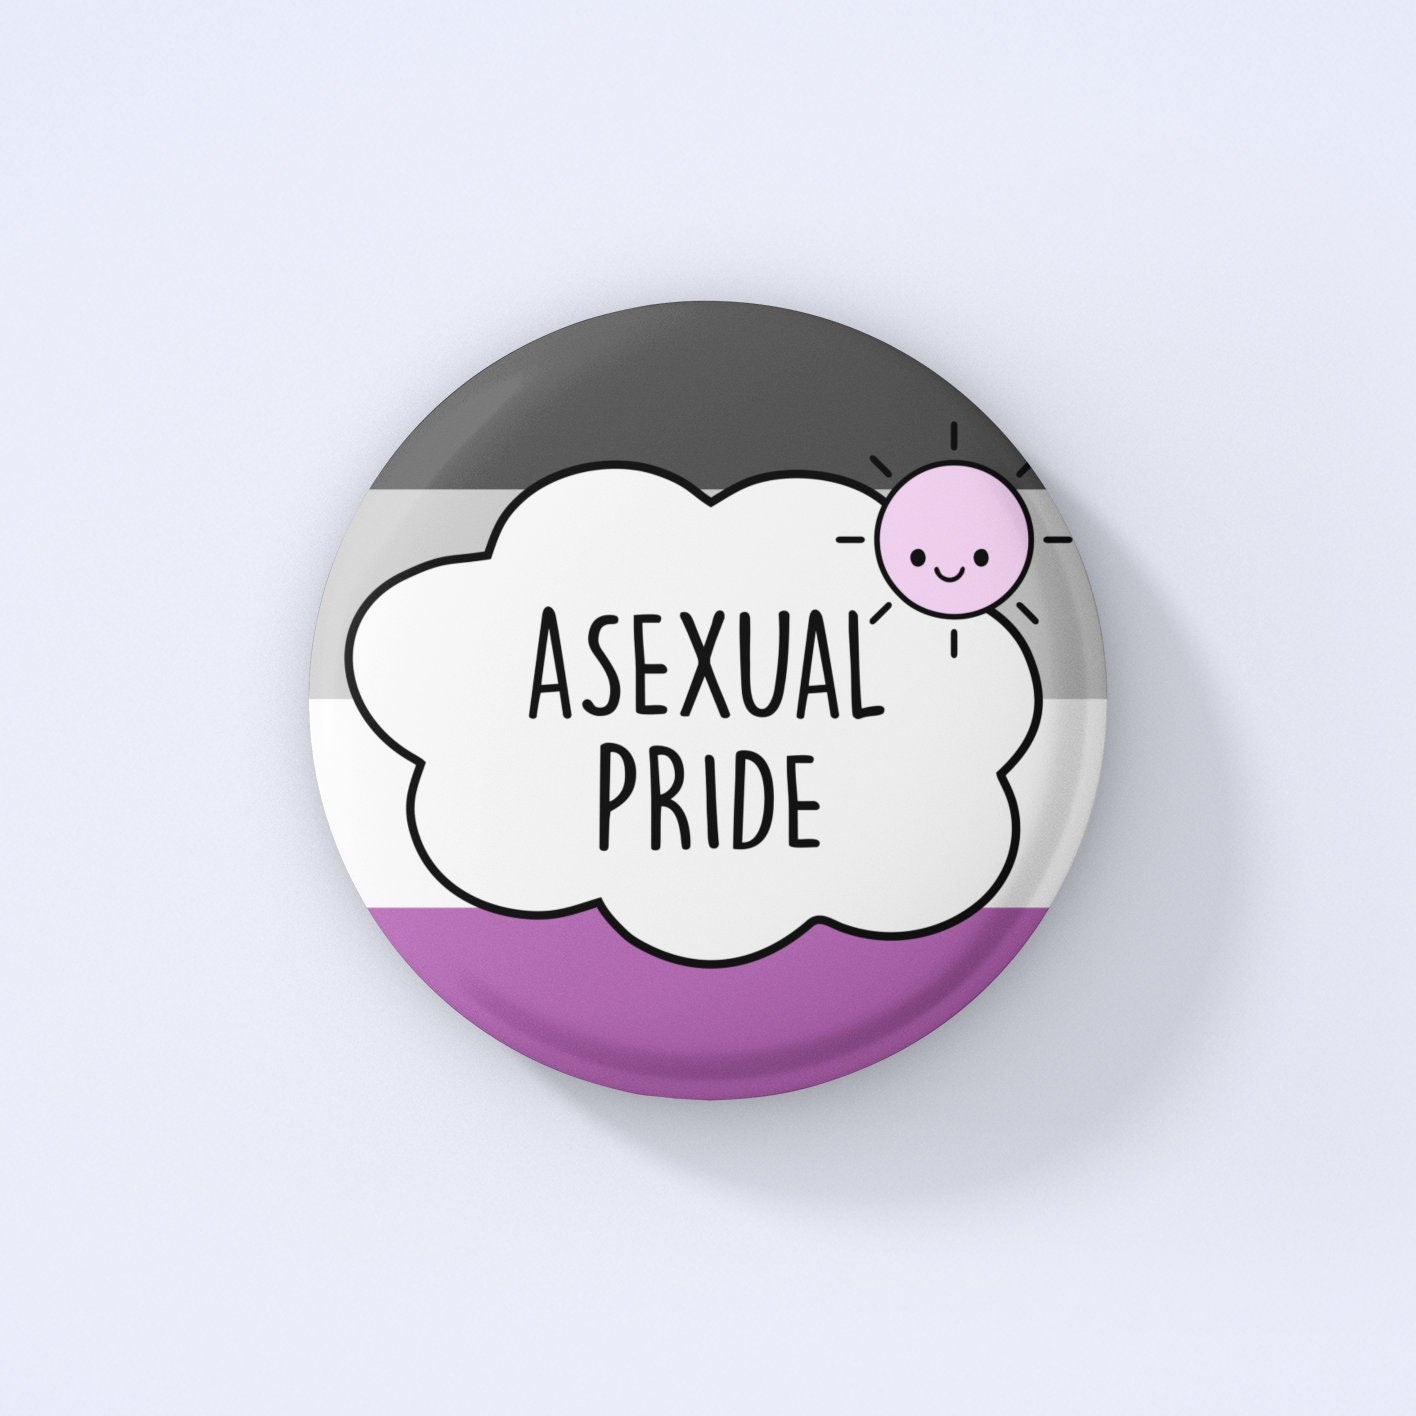 Asexual Pride Badge / Ace pride, Asexual Flag